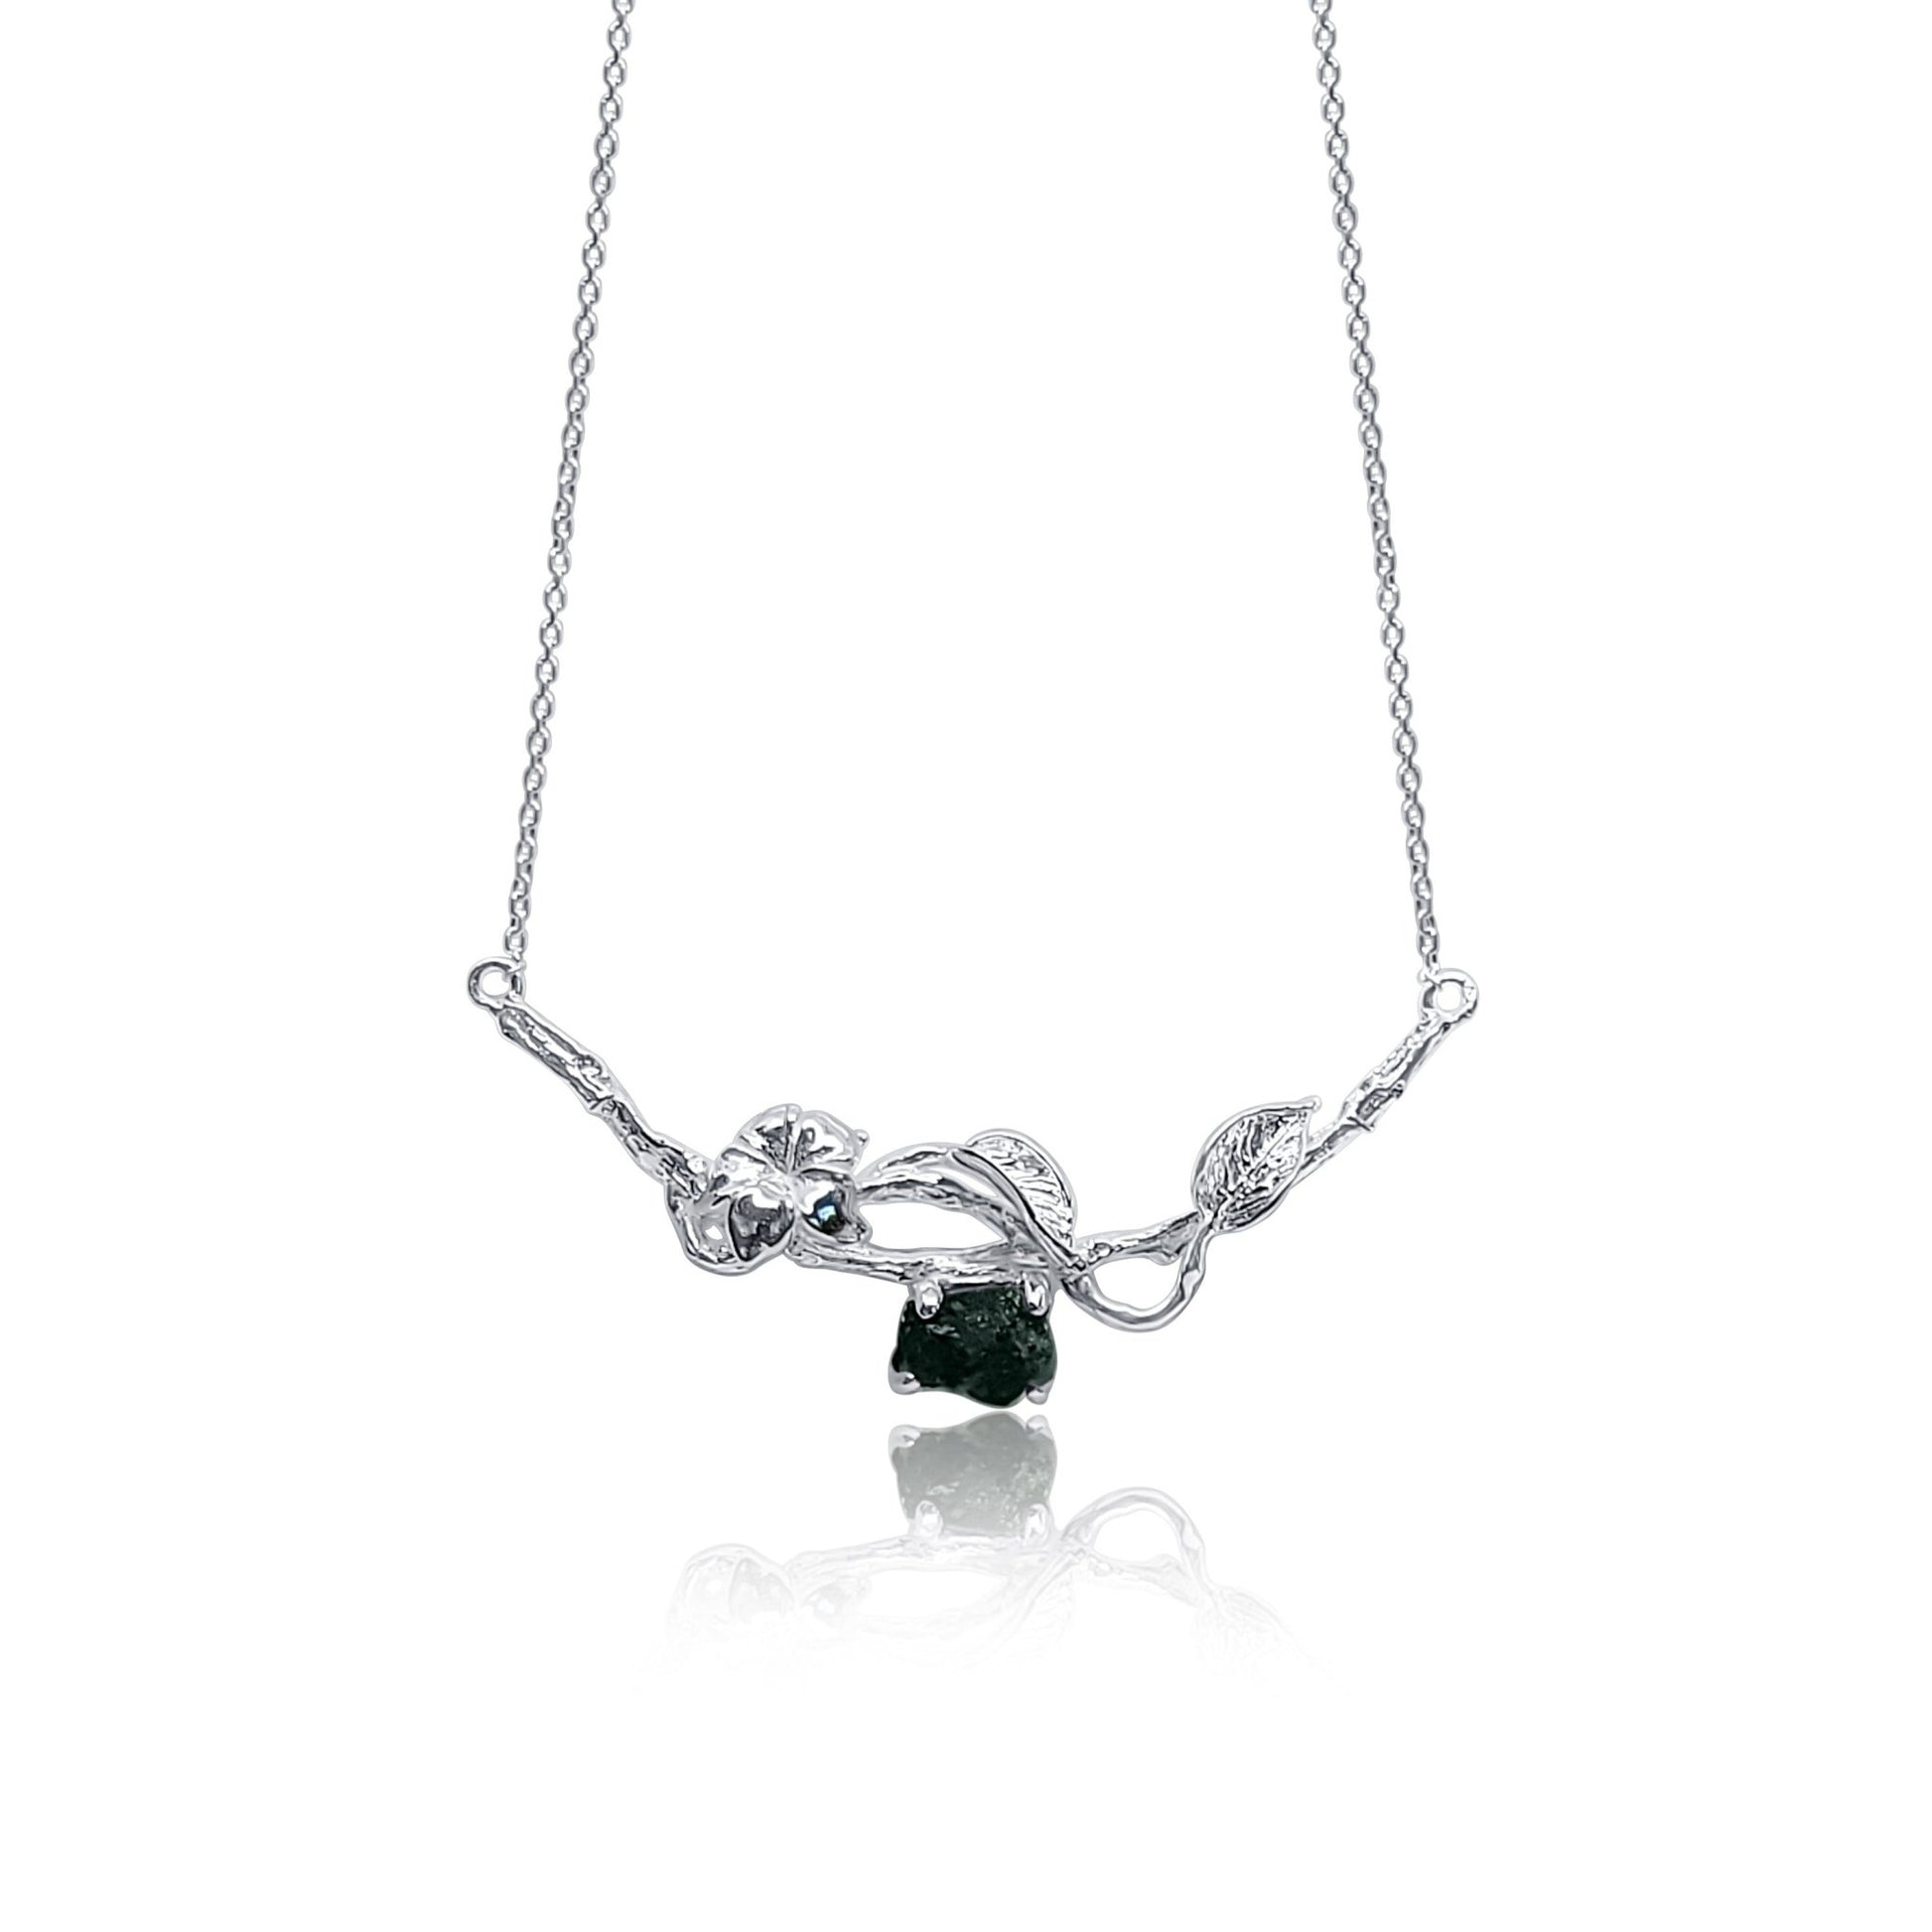 flower, leaf and branch silver necklace with natural emerald stone on adjustable necklace chain